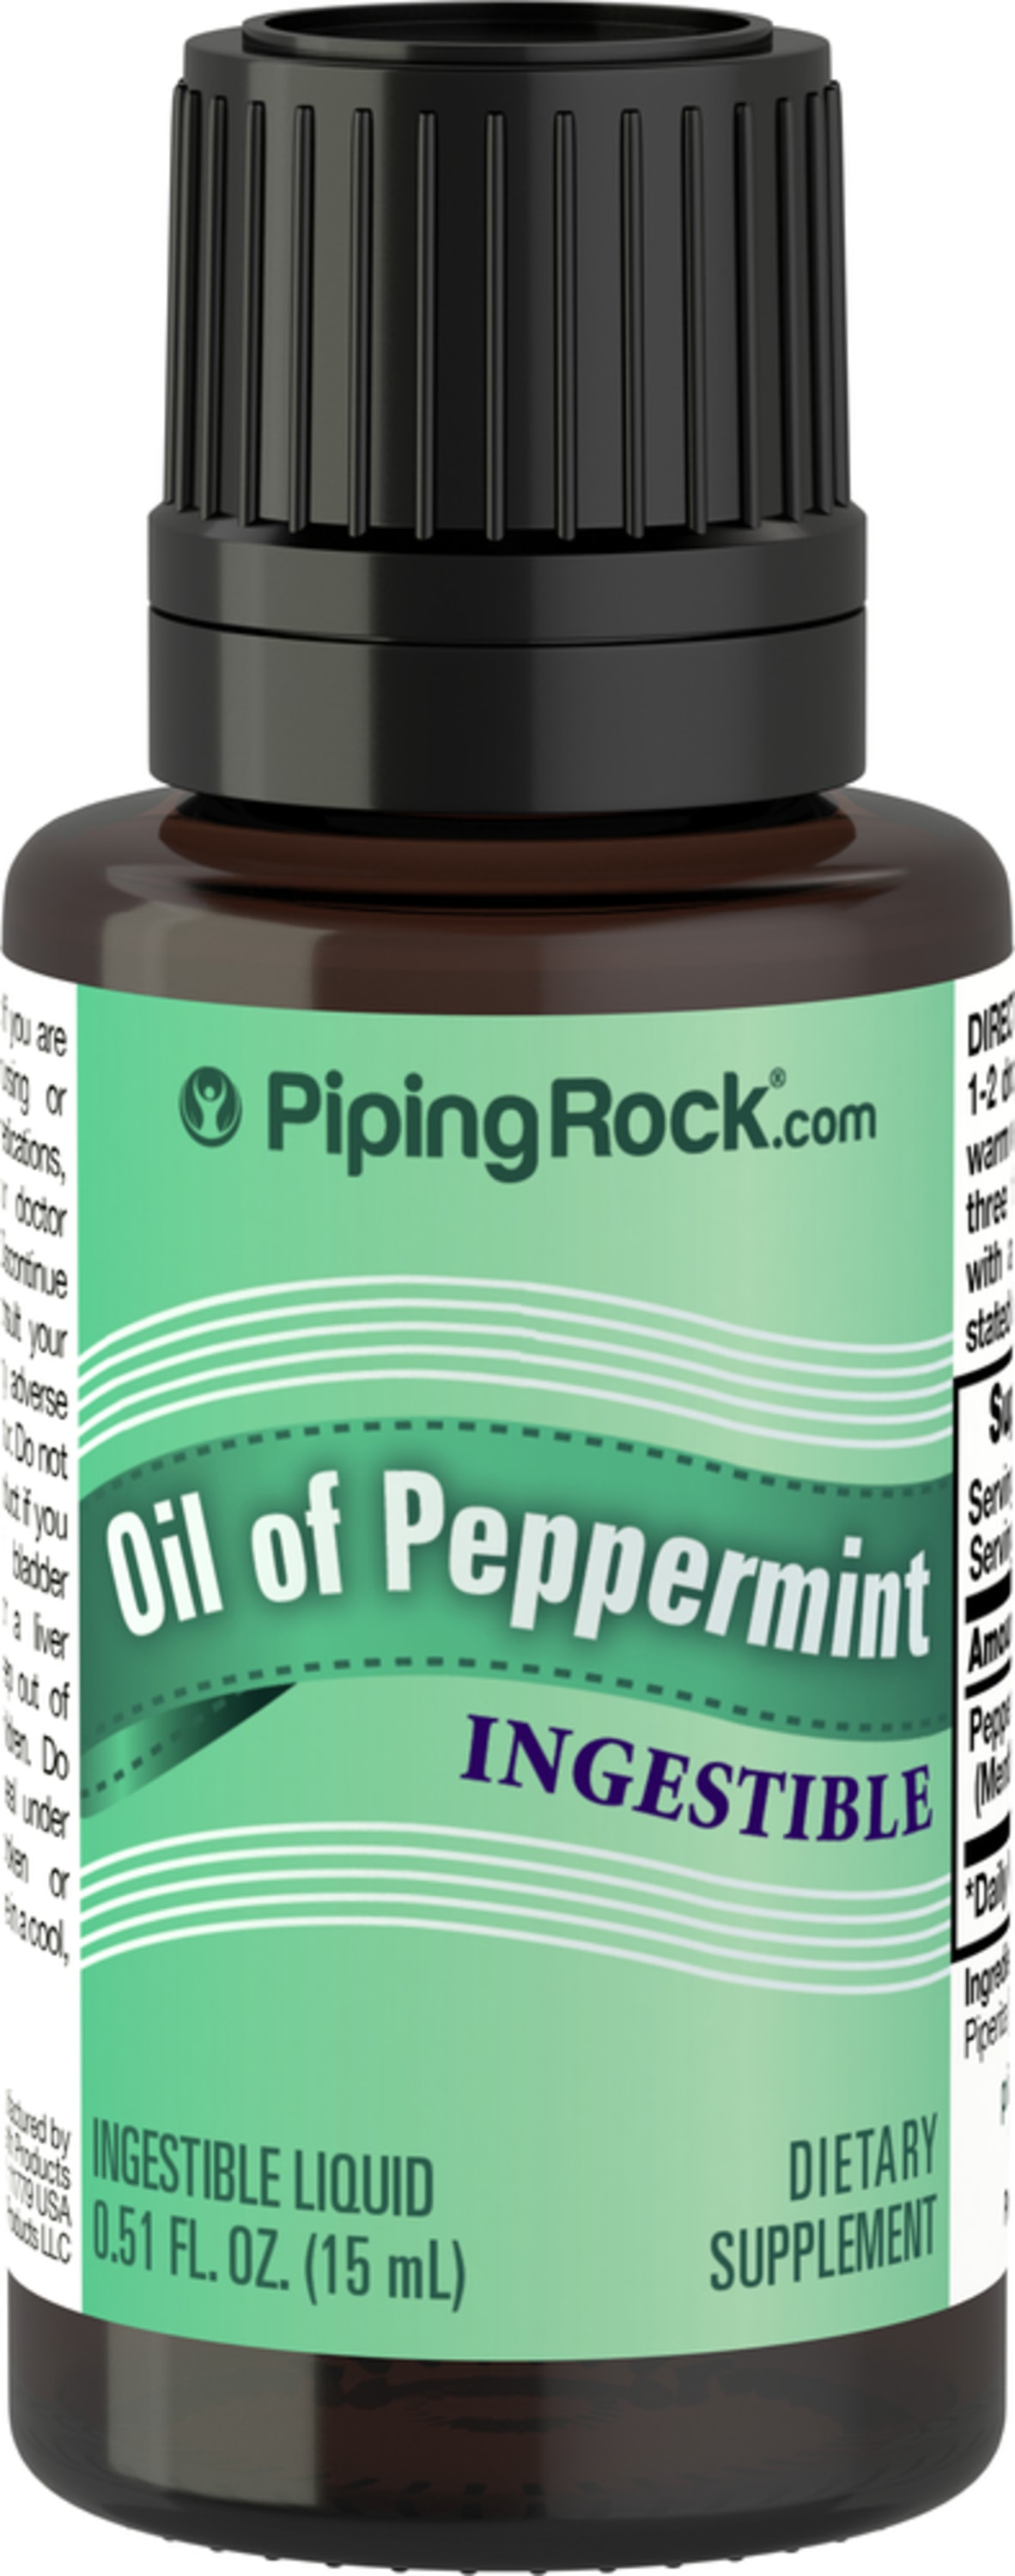 https://cdn2.pipingrock.com/images/product/amazon/product/oil-of-peppermint-ingestible-12-fl-oz-15-ml-dropper-bottle-2351.jpg?tx=w_3000,h_3000,c_fit&v=3